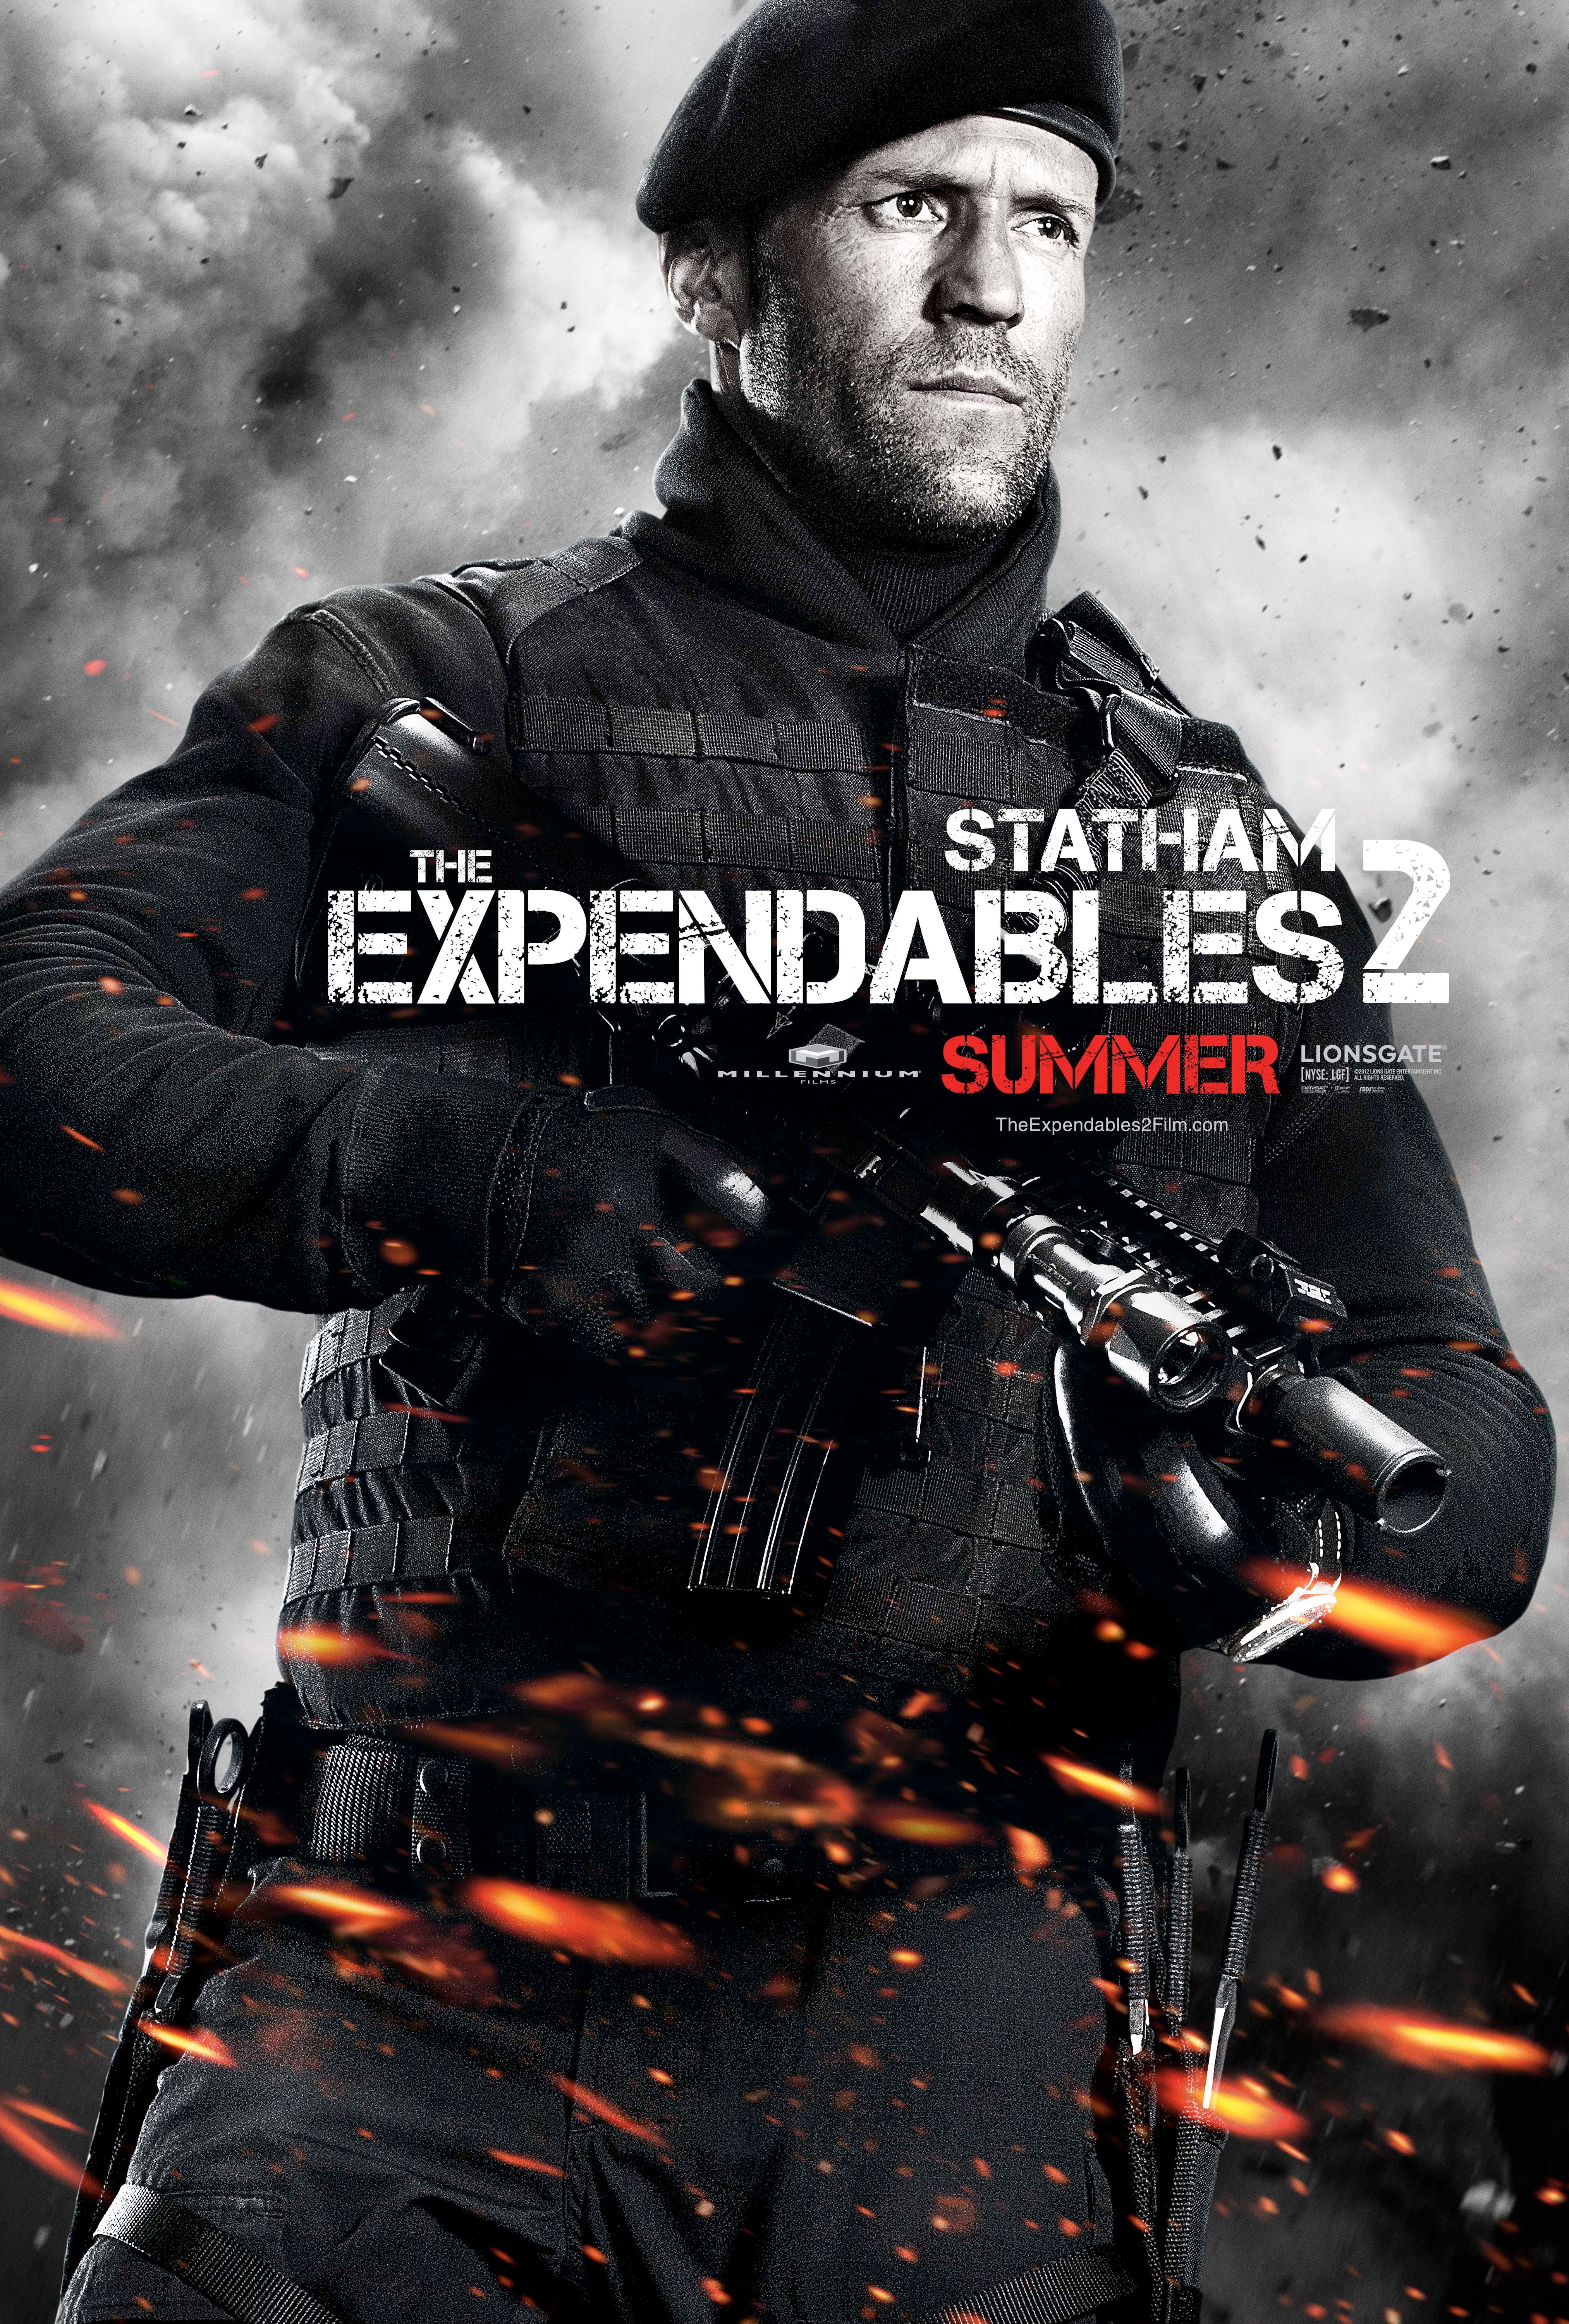 The Expendables 2 Character Poser #2